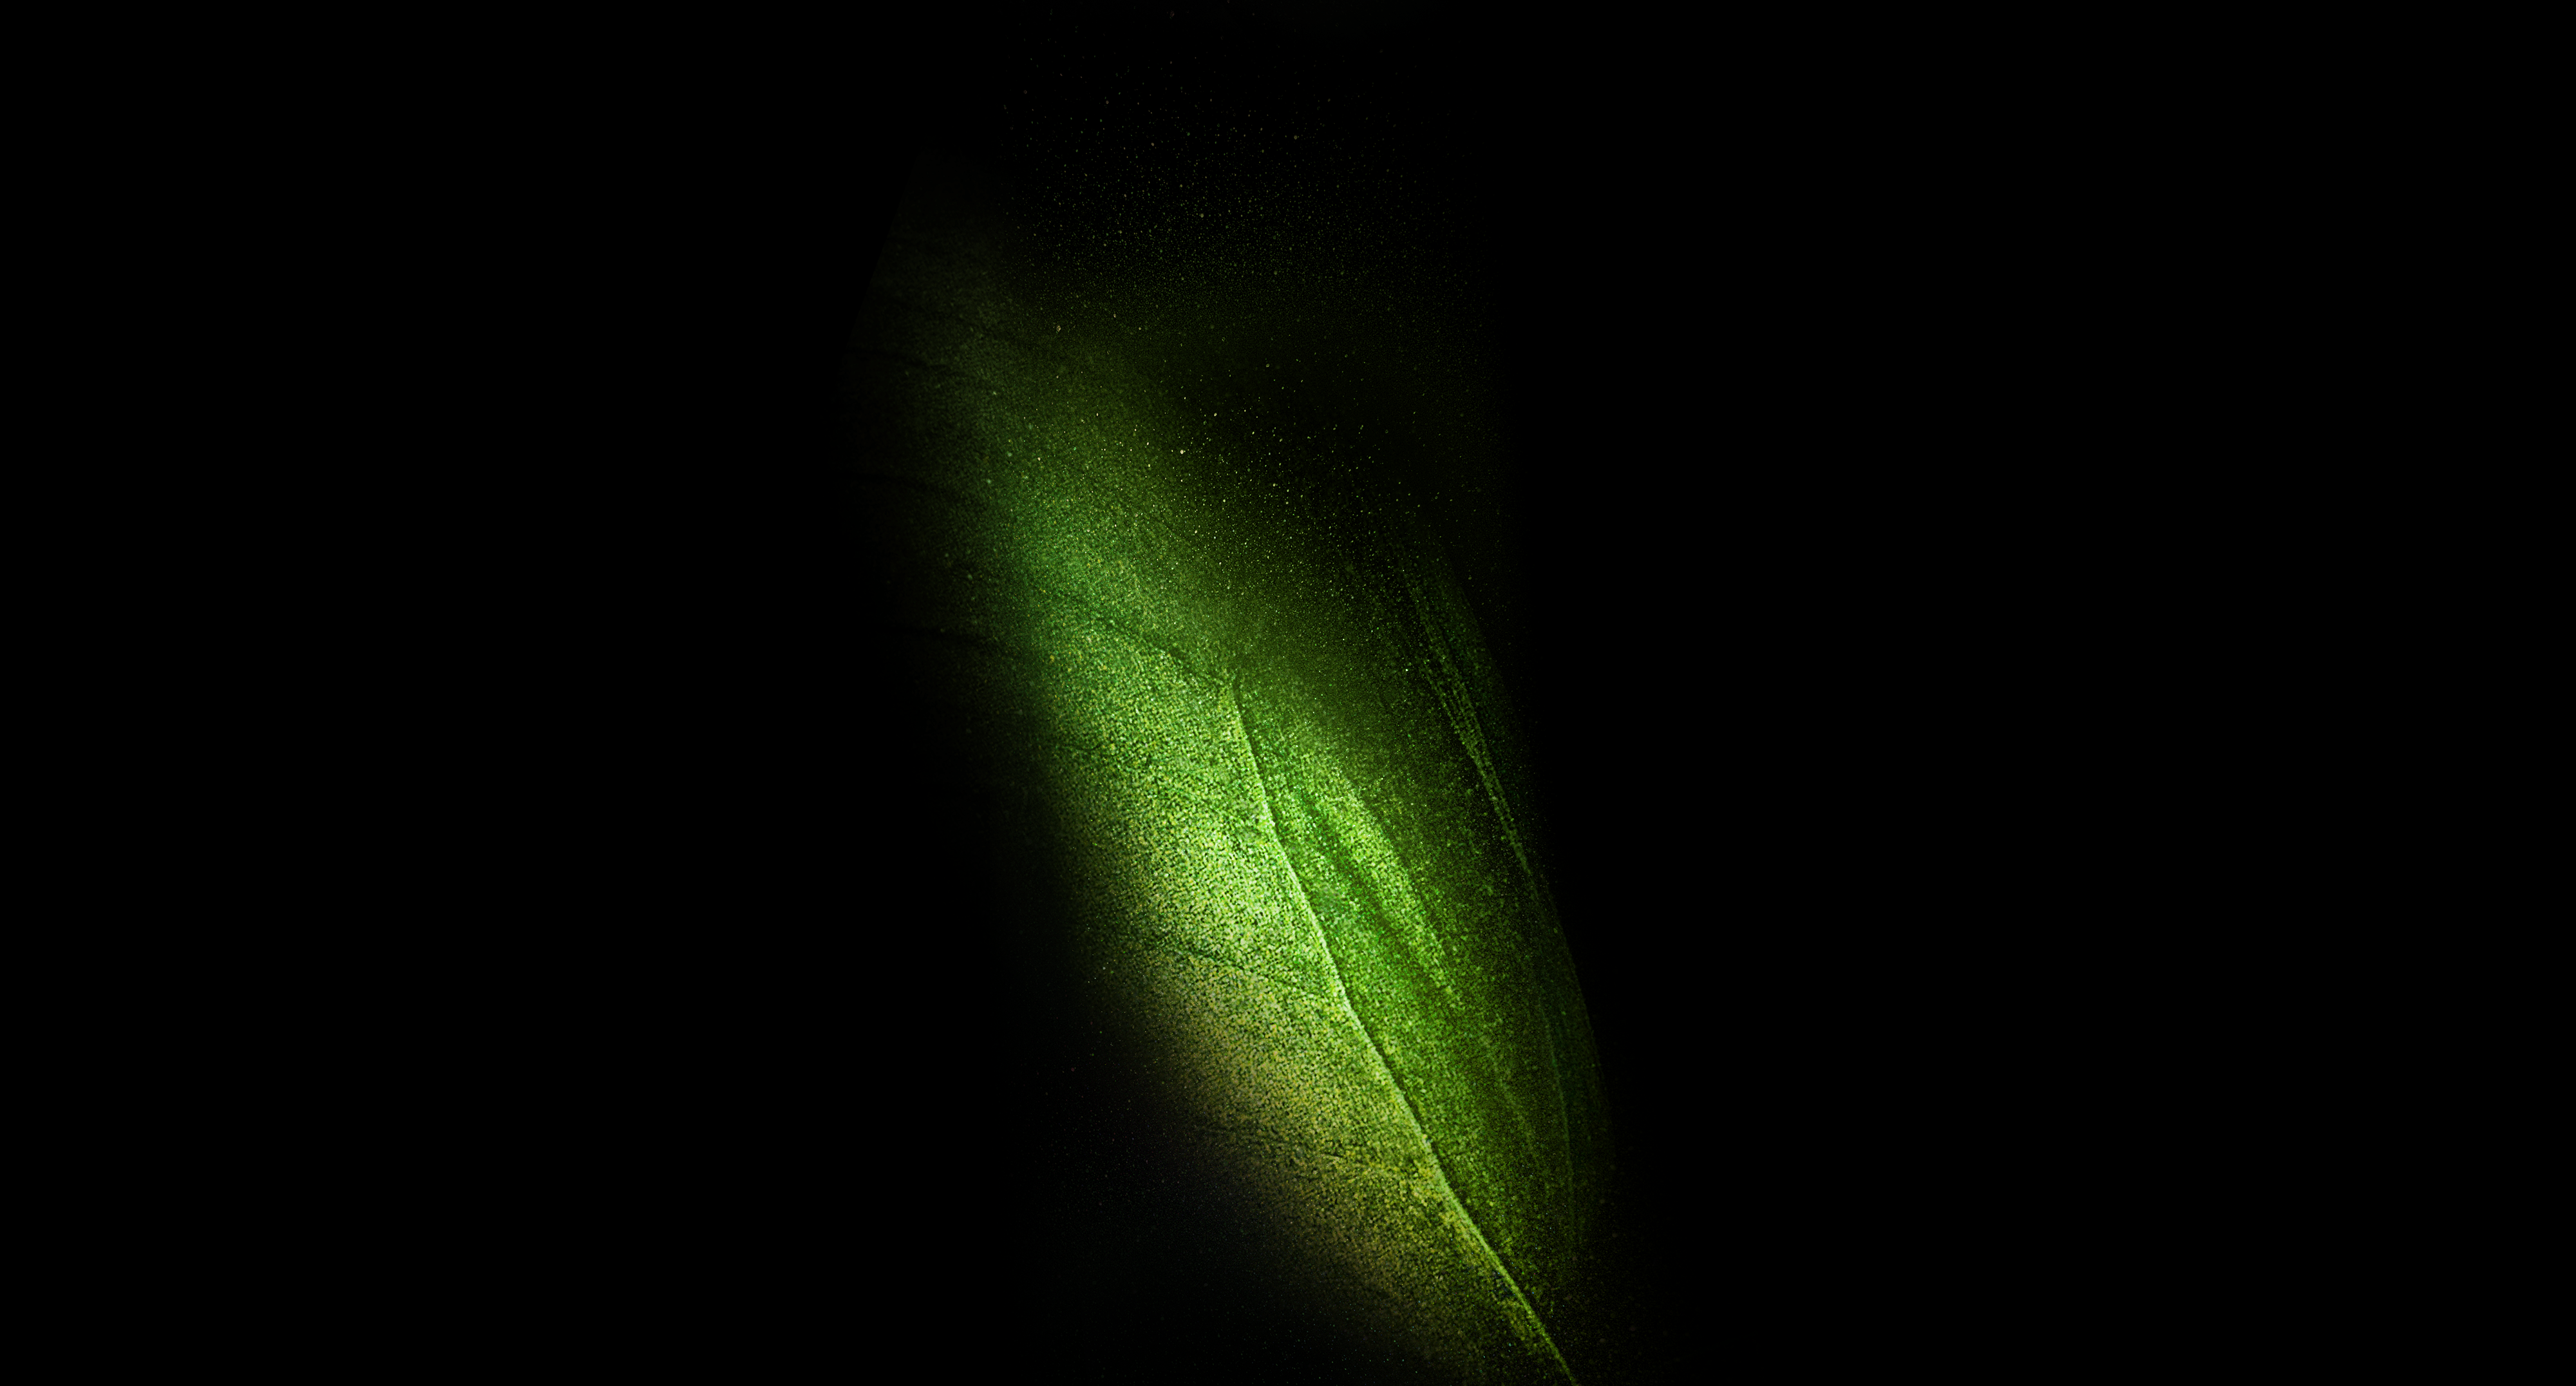 Green butterfly wing on black background logo samsung galaxy fold wallpaper and image, picture, photo